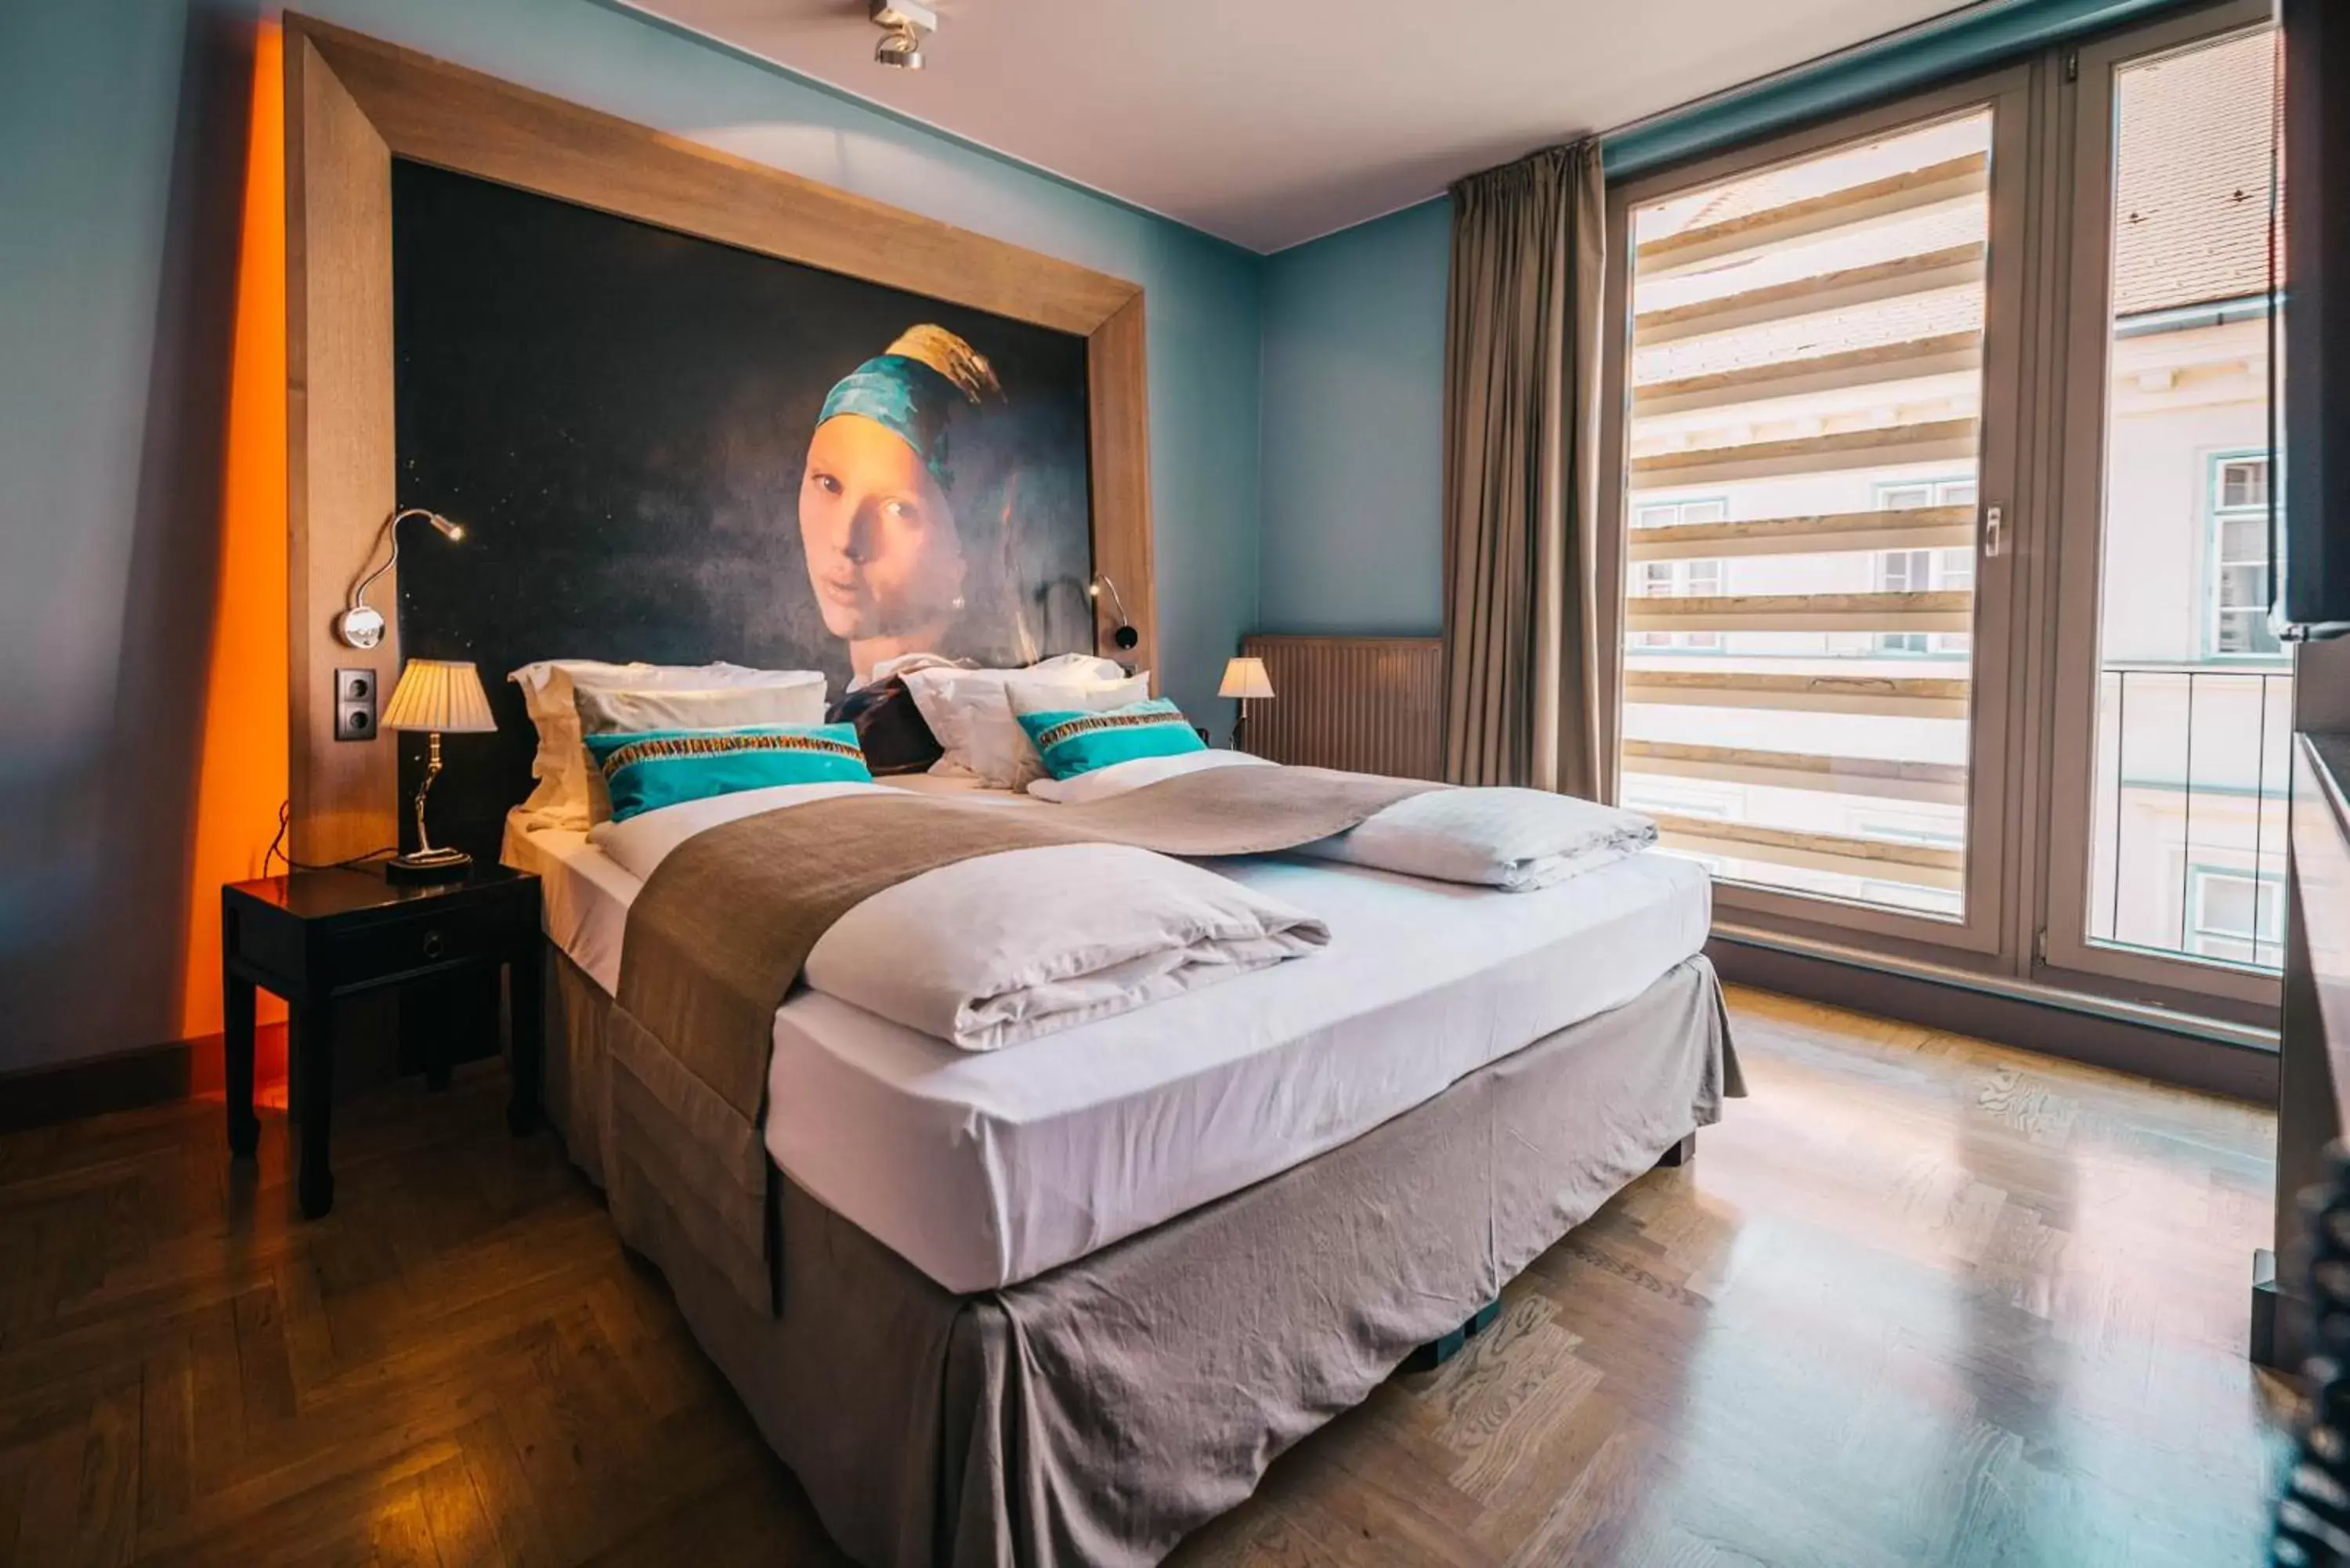 Bed, Room Photo in BALTAZÁR Boutique Hotel by Zsidai Hotels at Buda Castle